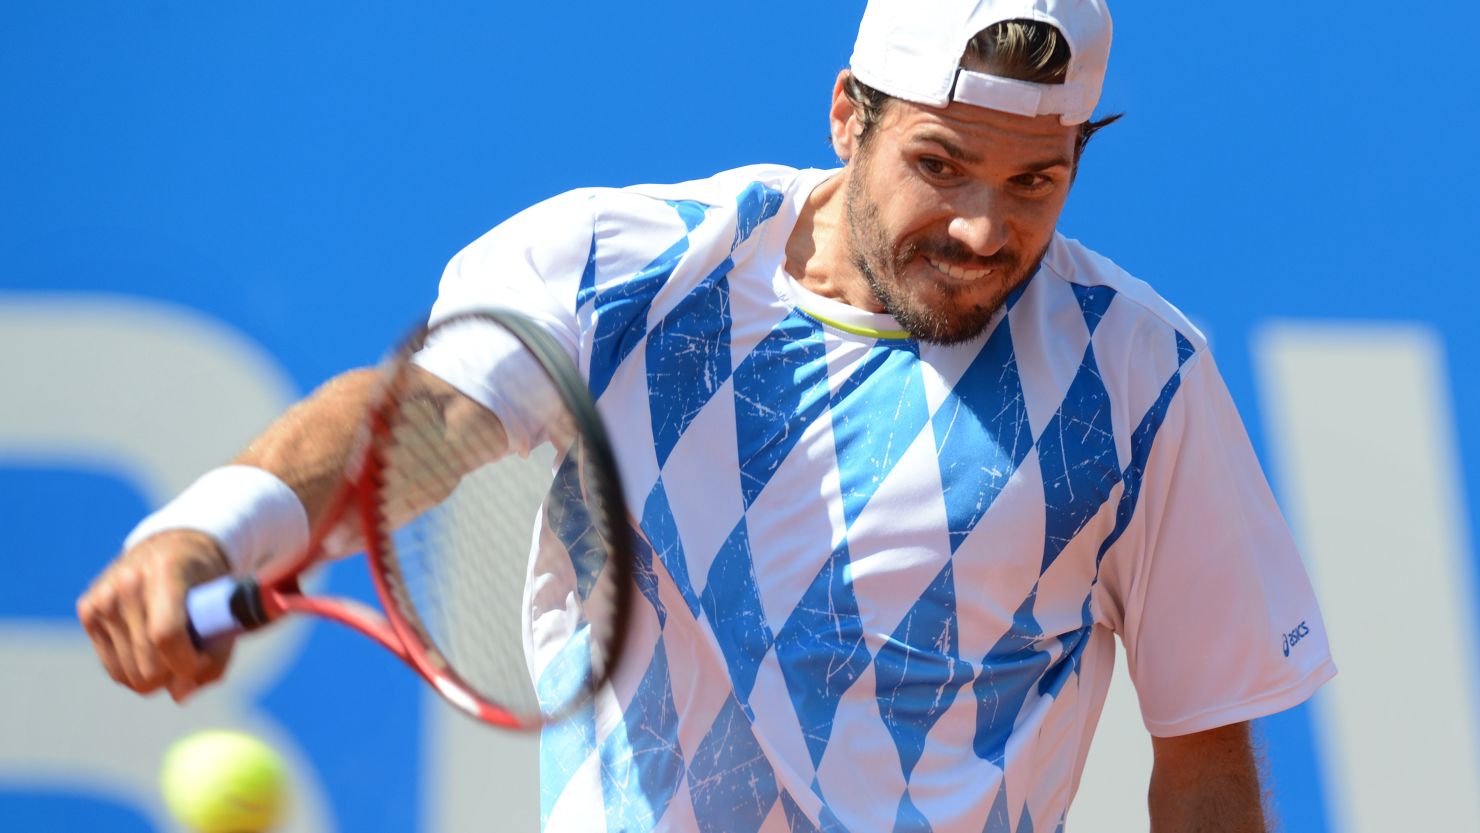 German veteran Tommy Haas claimed two notable scalps on his way to the Munich semifinals this week.